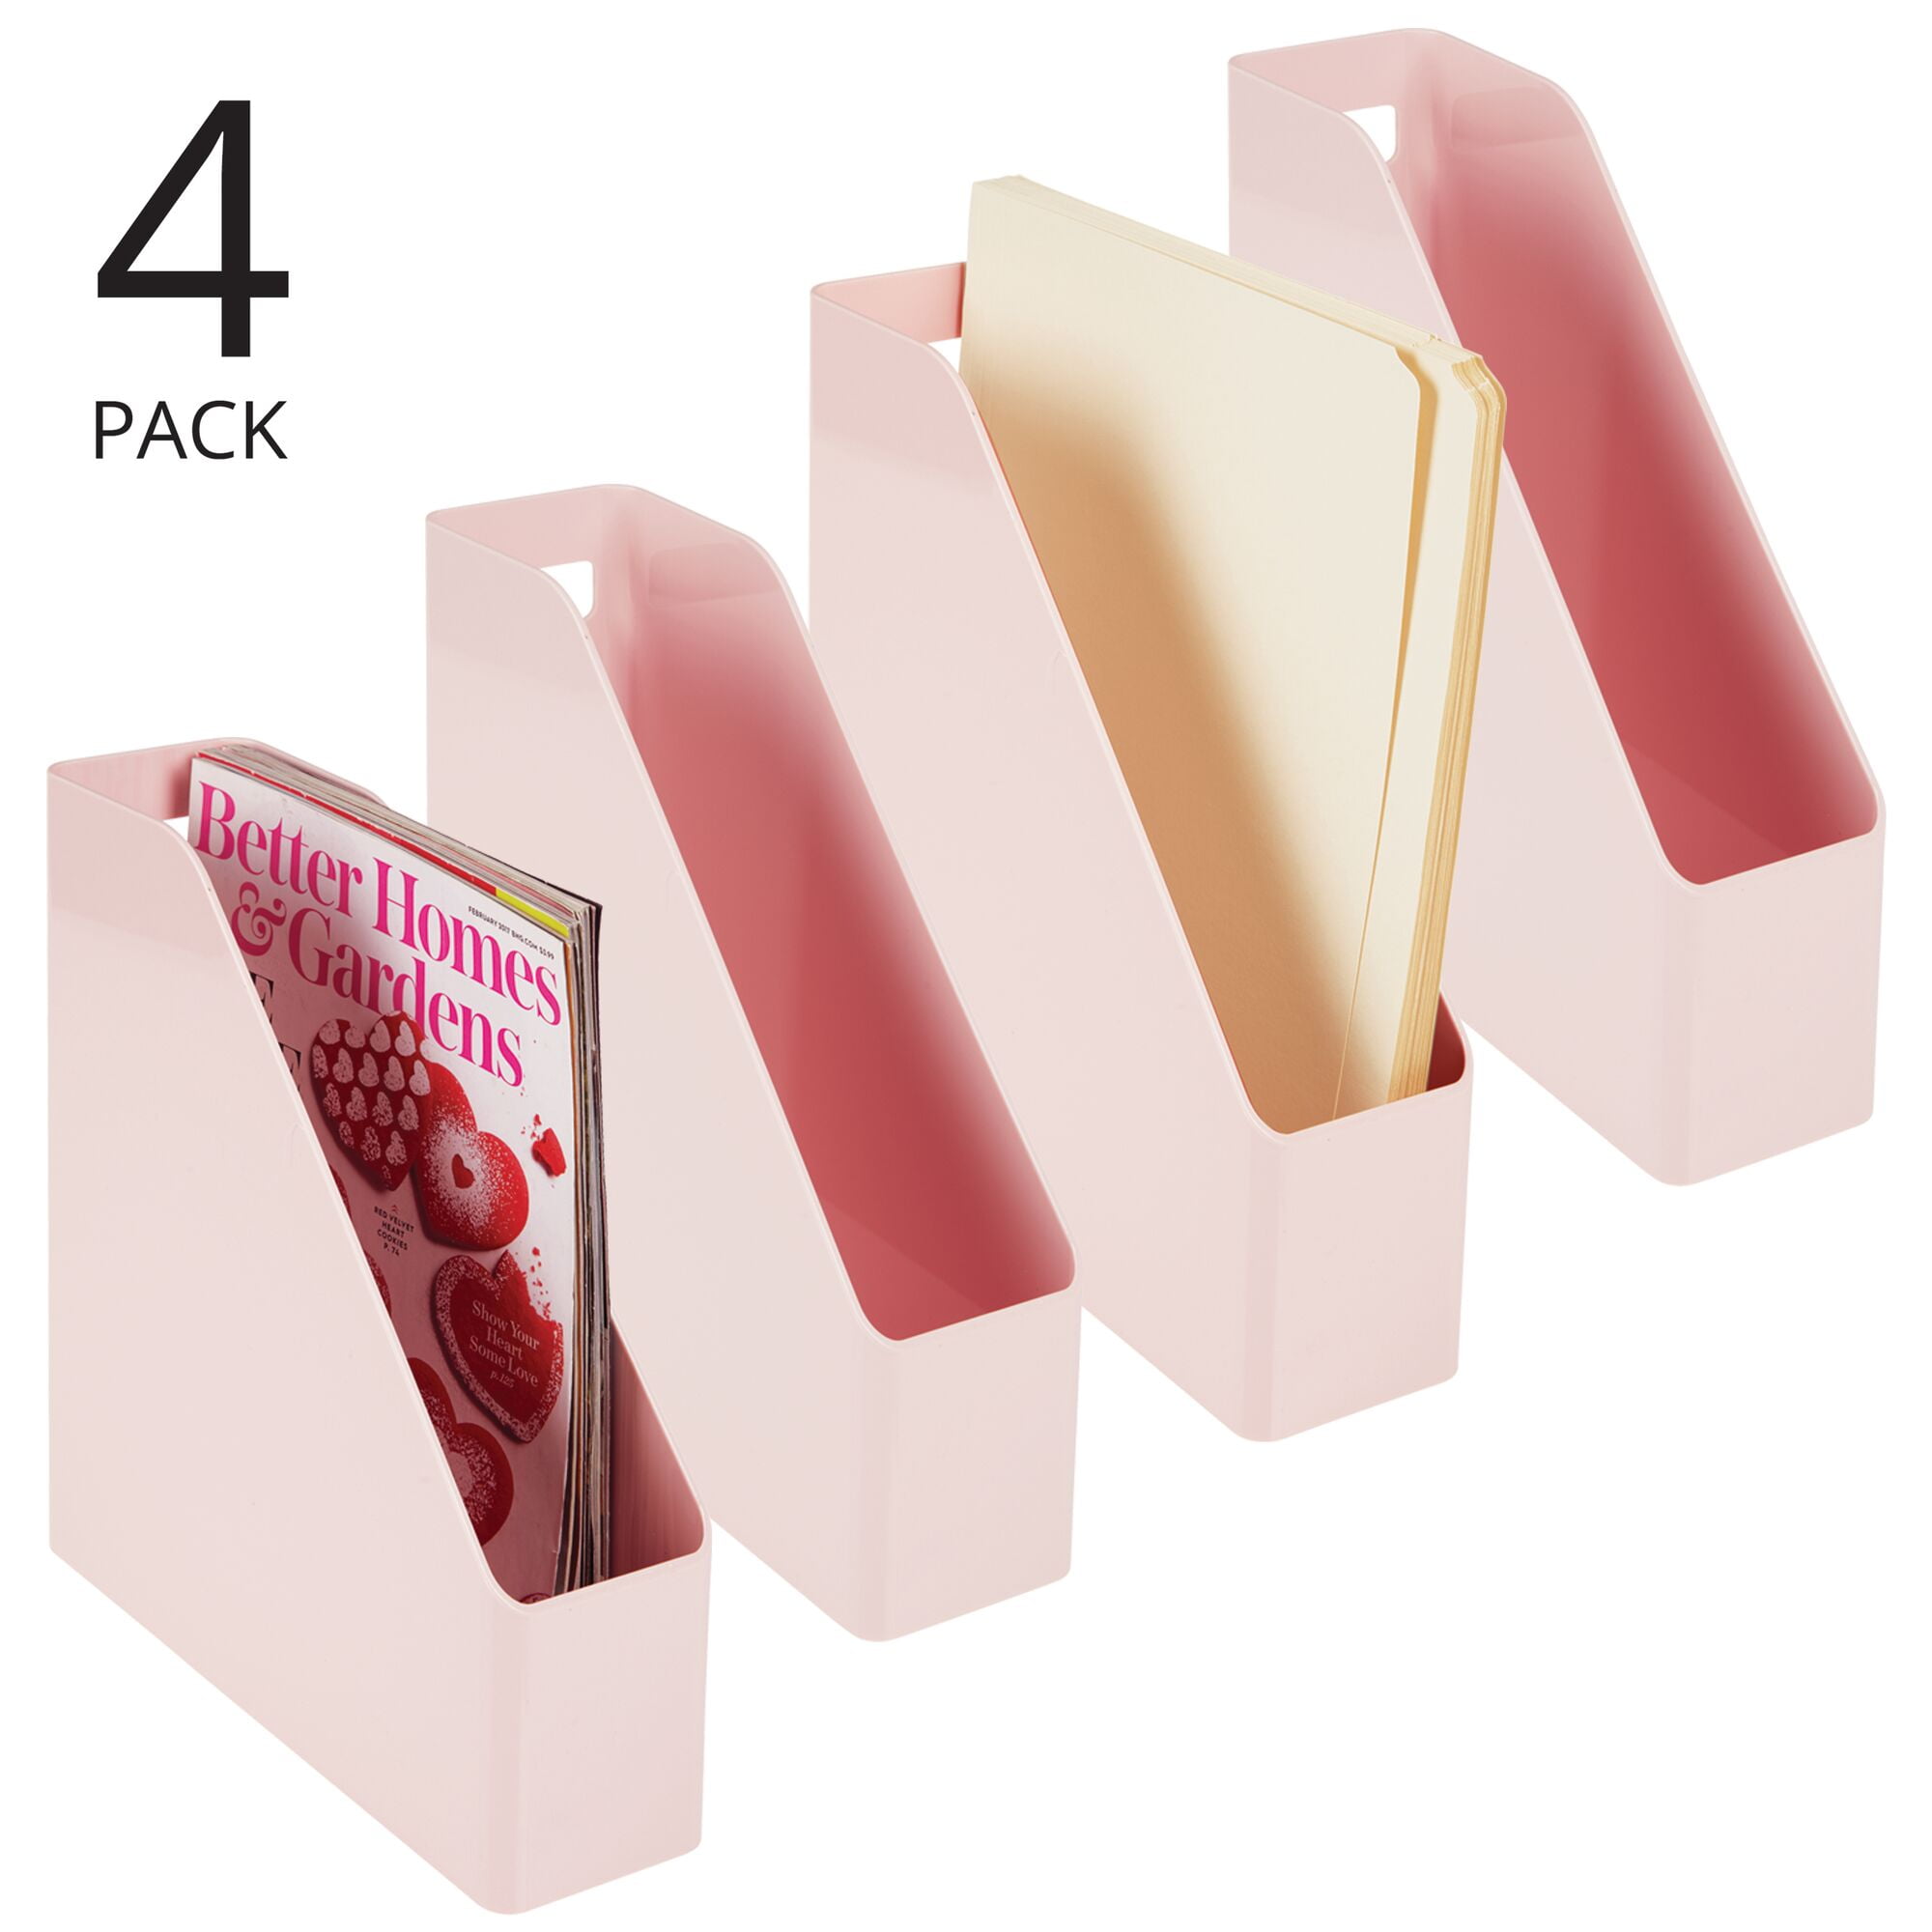  Vicenpal 2 Pack Slim Acrylic File Box with Handles